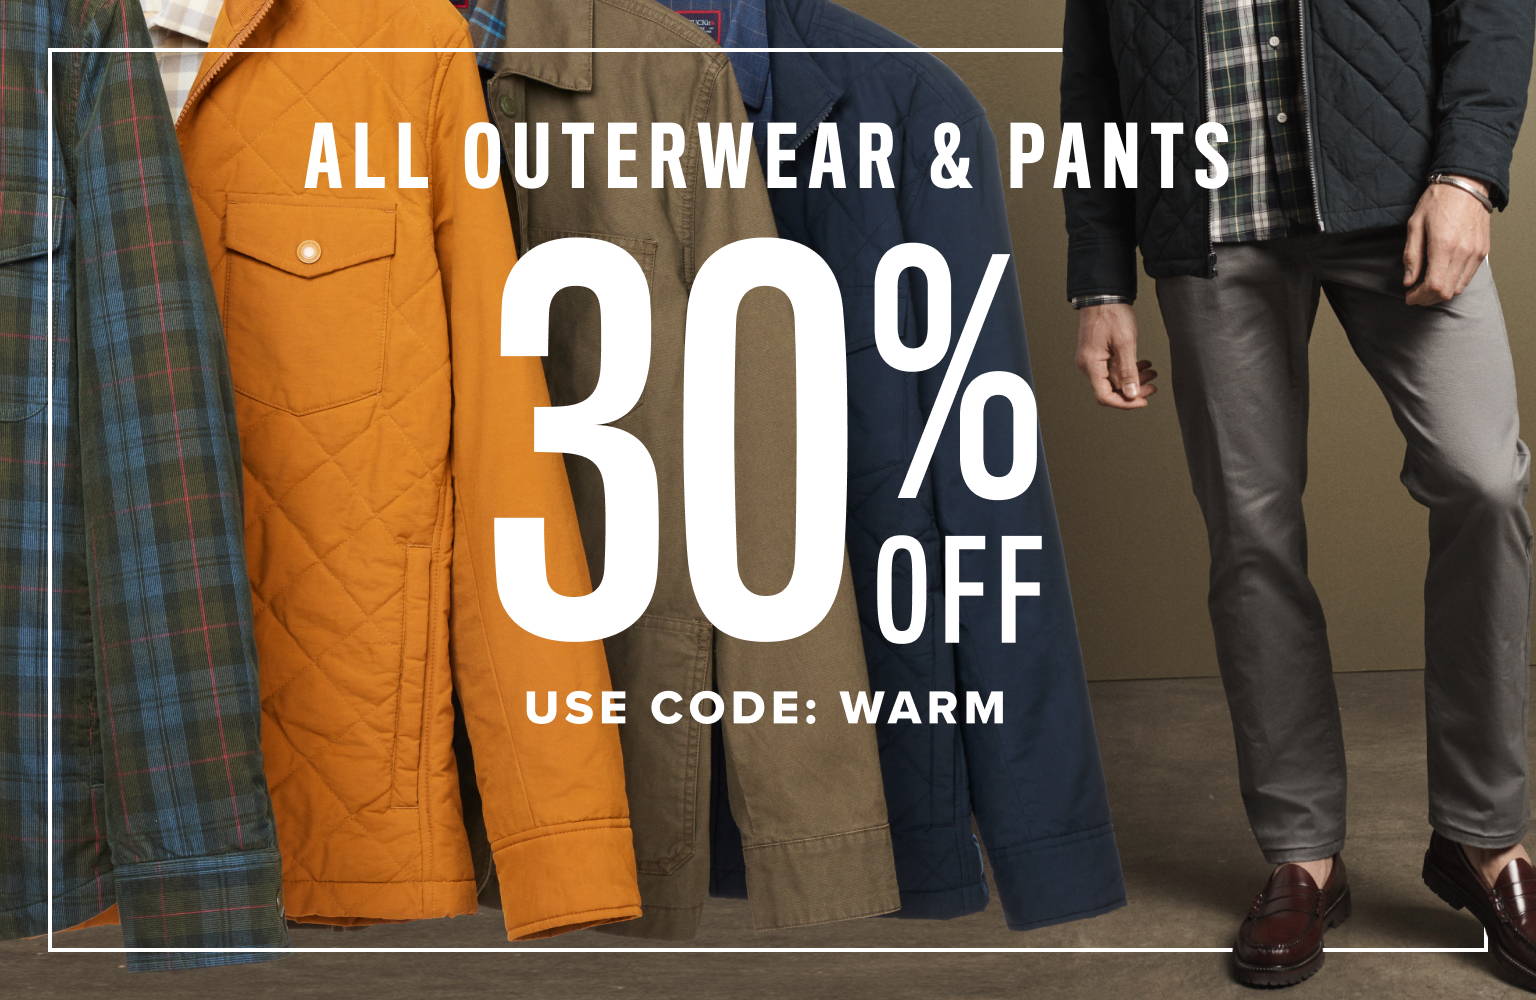 All Outerwear & Pants 30% Off. Use code: WARM